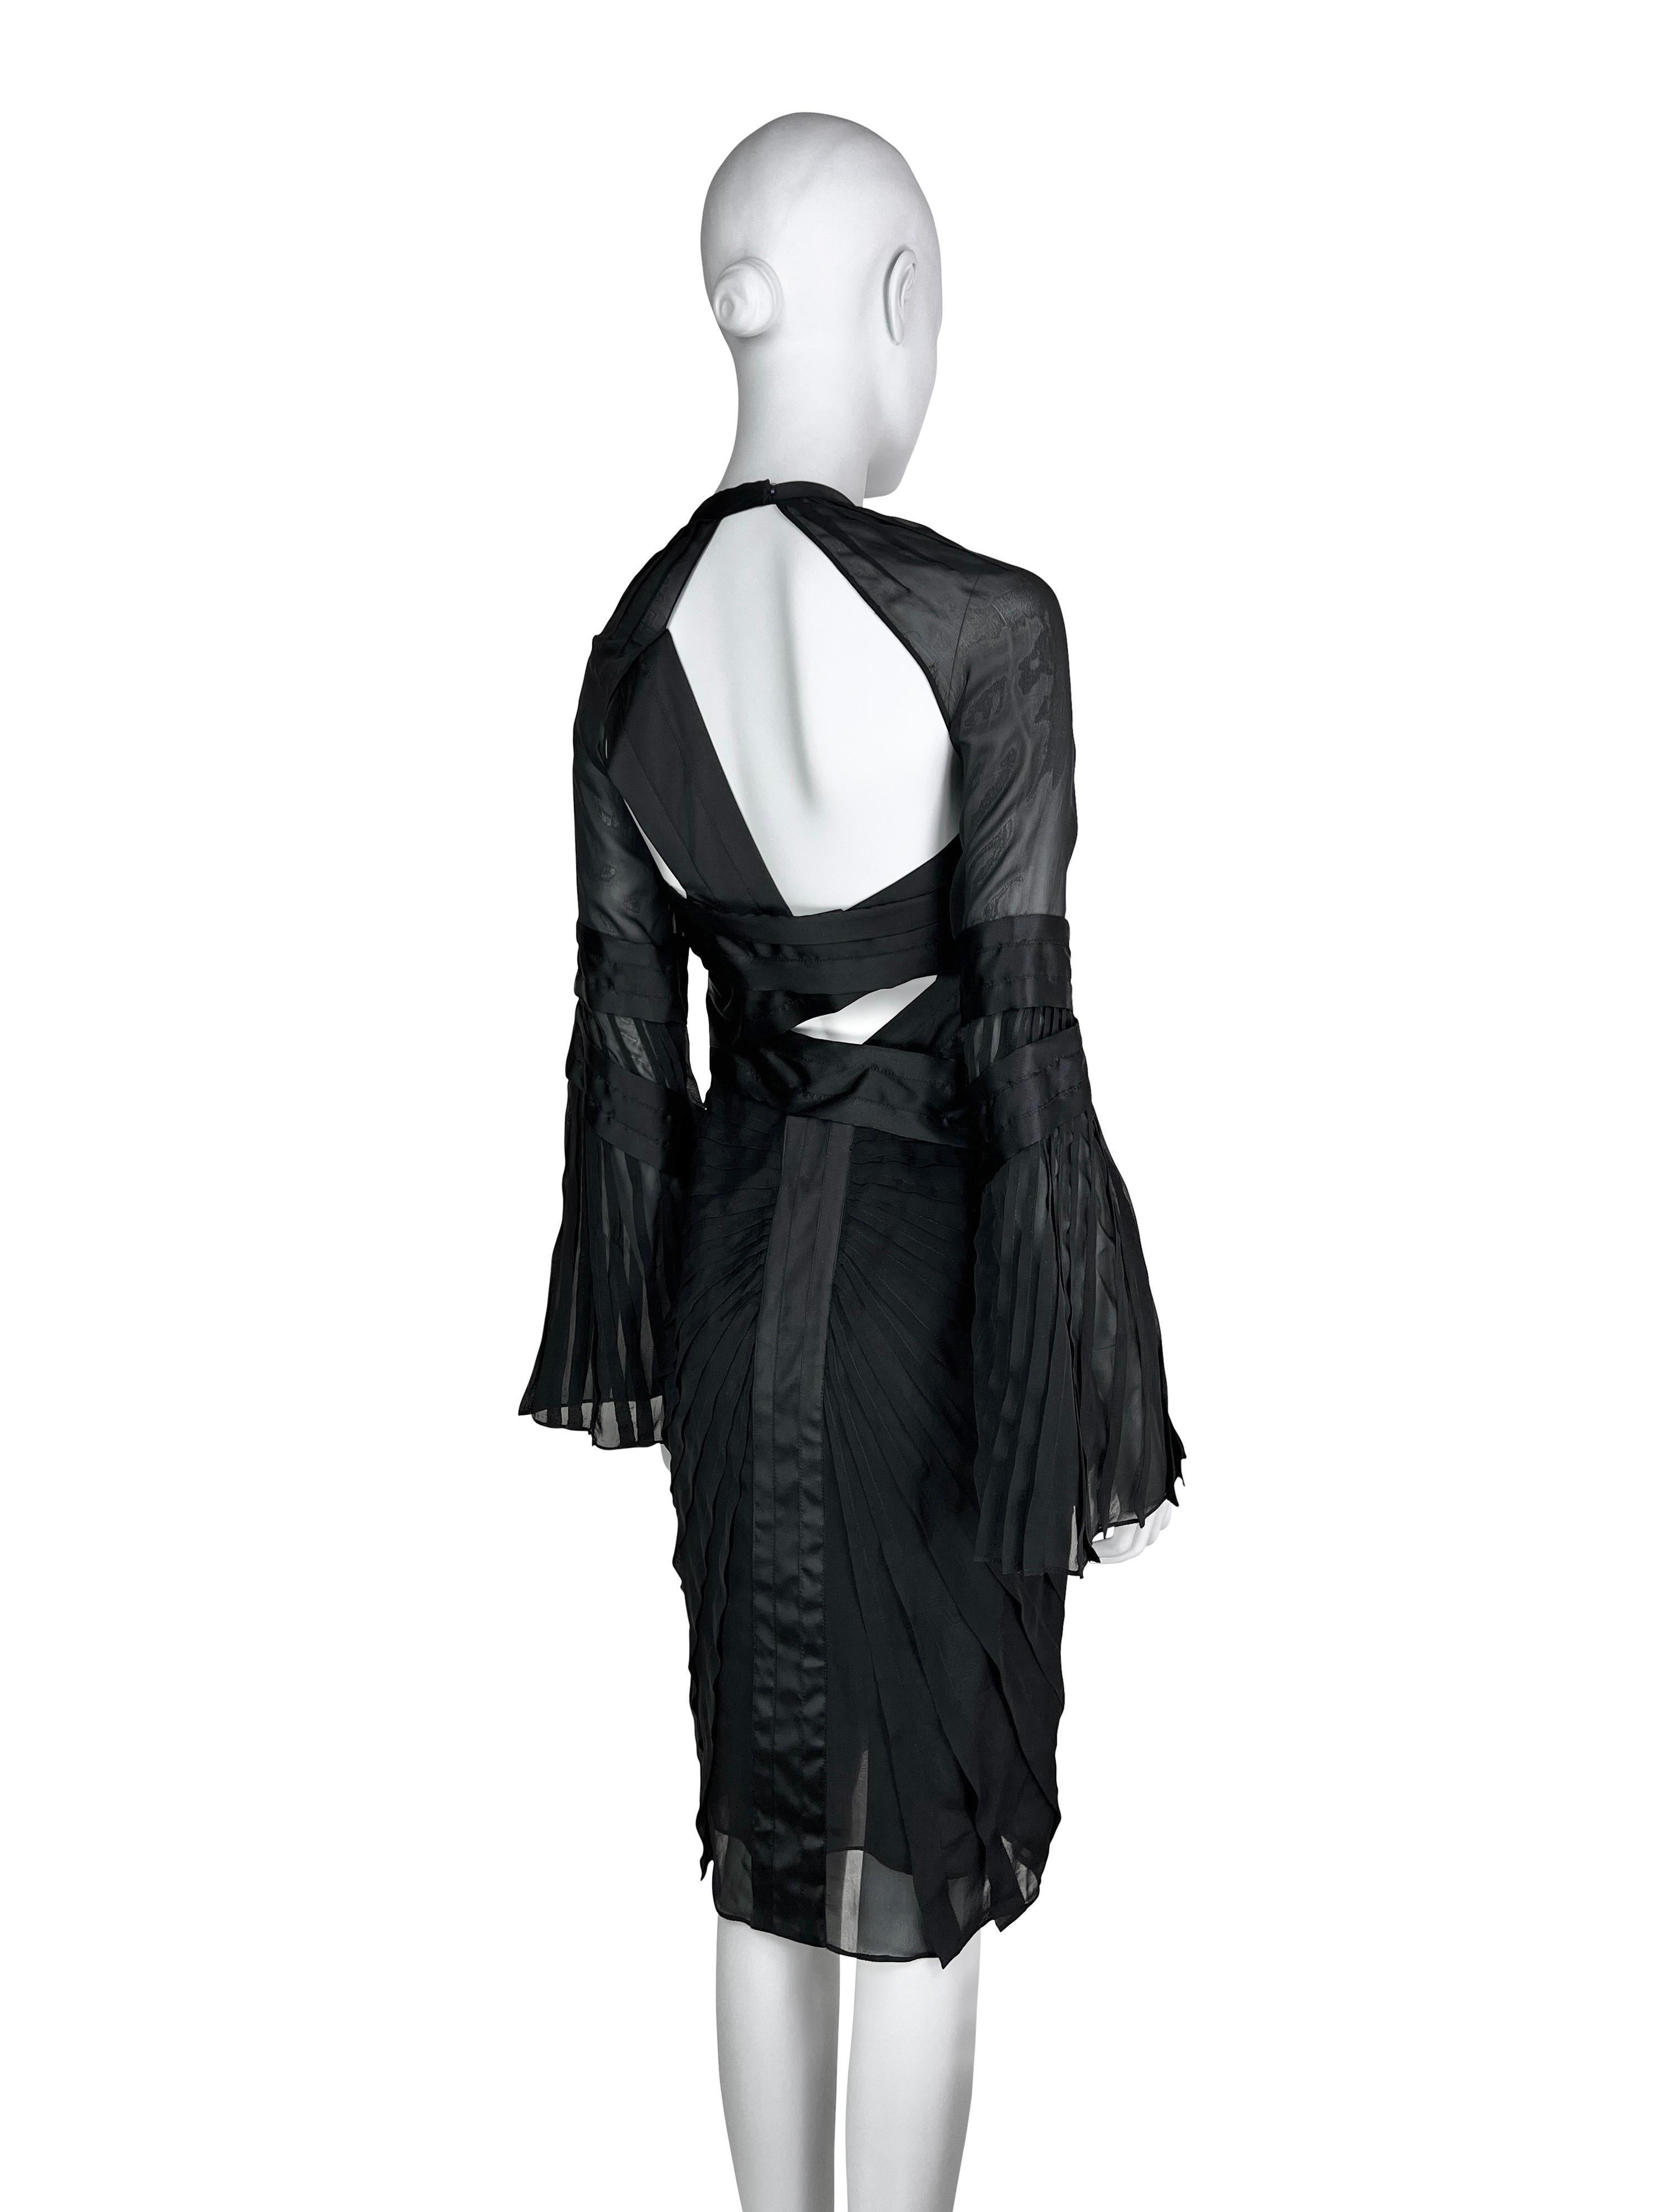 Gucci by Tom Ford Fall 2004 Pleated Bondage Silk Dress For Sale 4